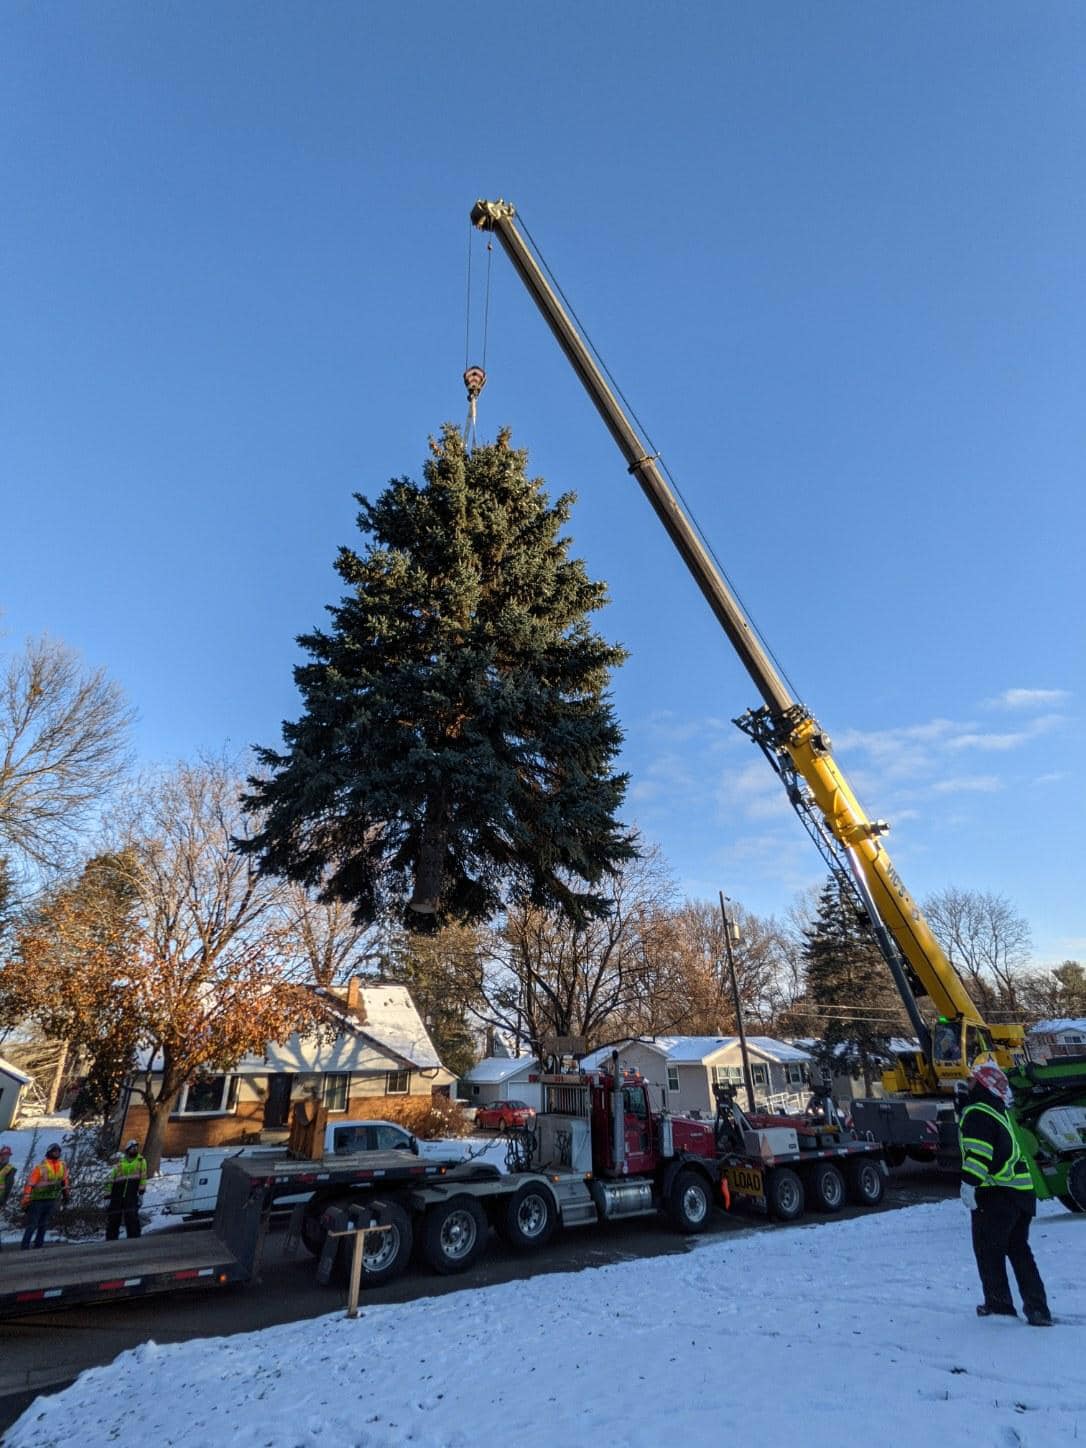 Union Depot Tree being moved with a crane. 